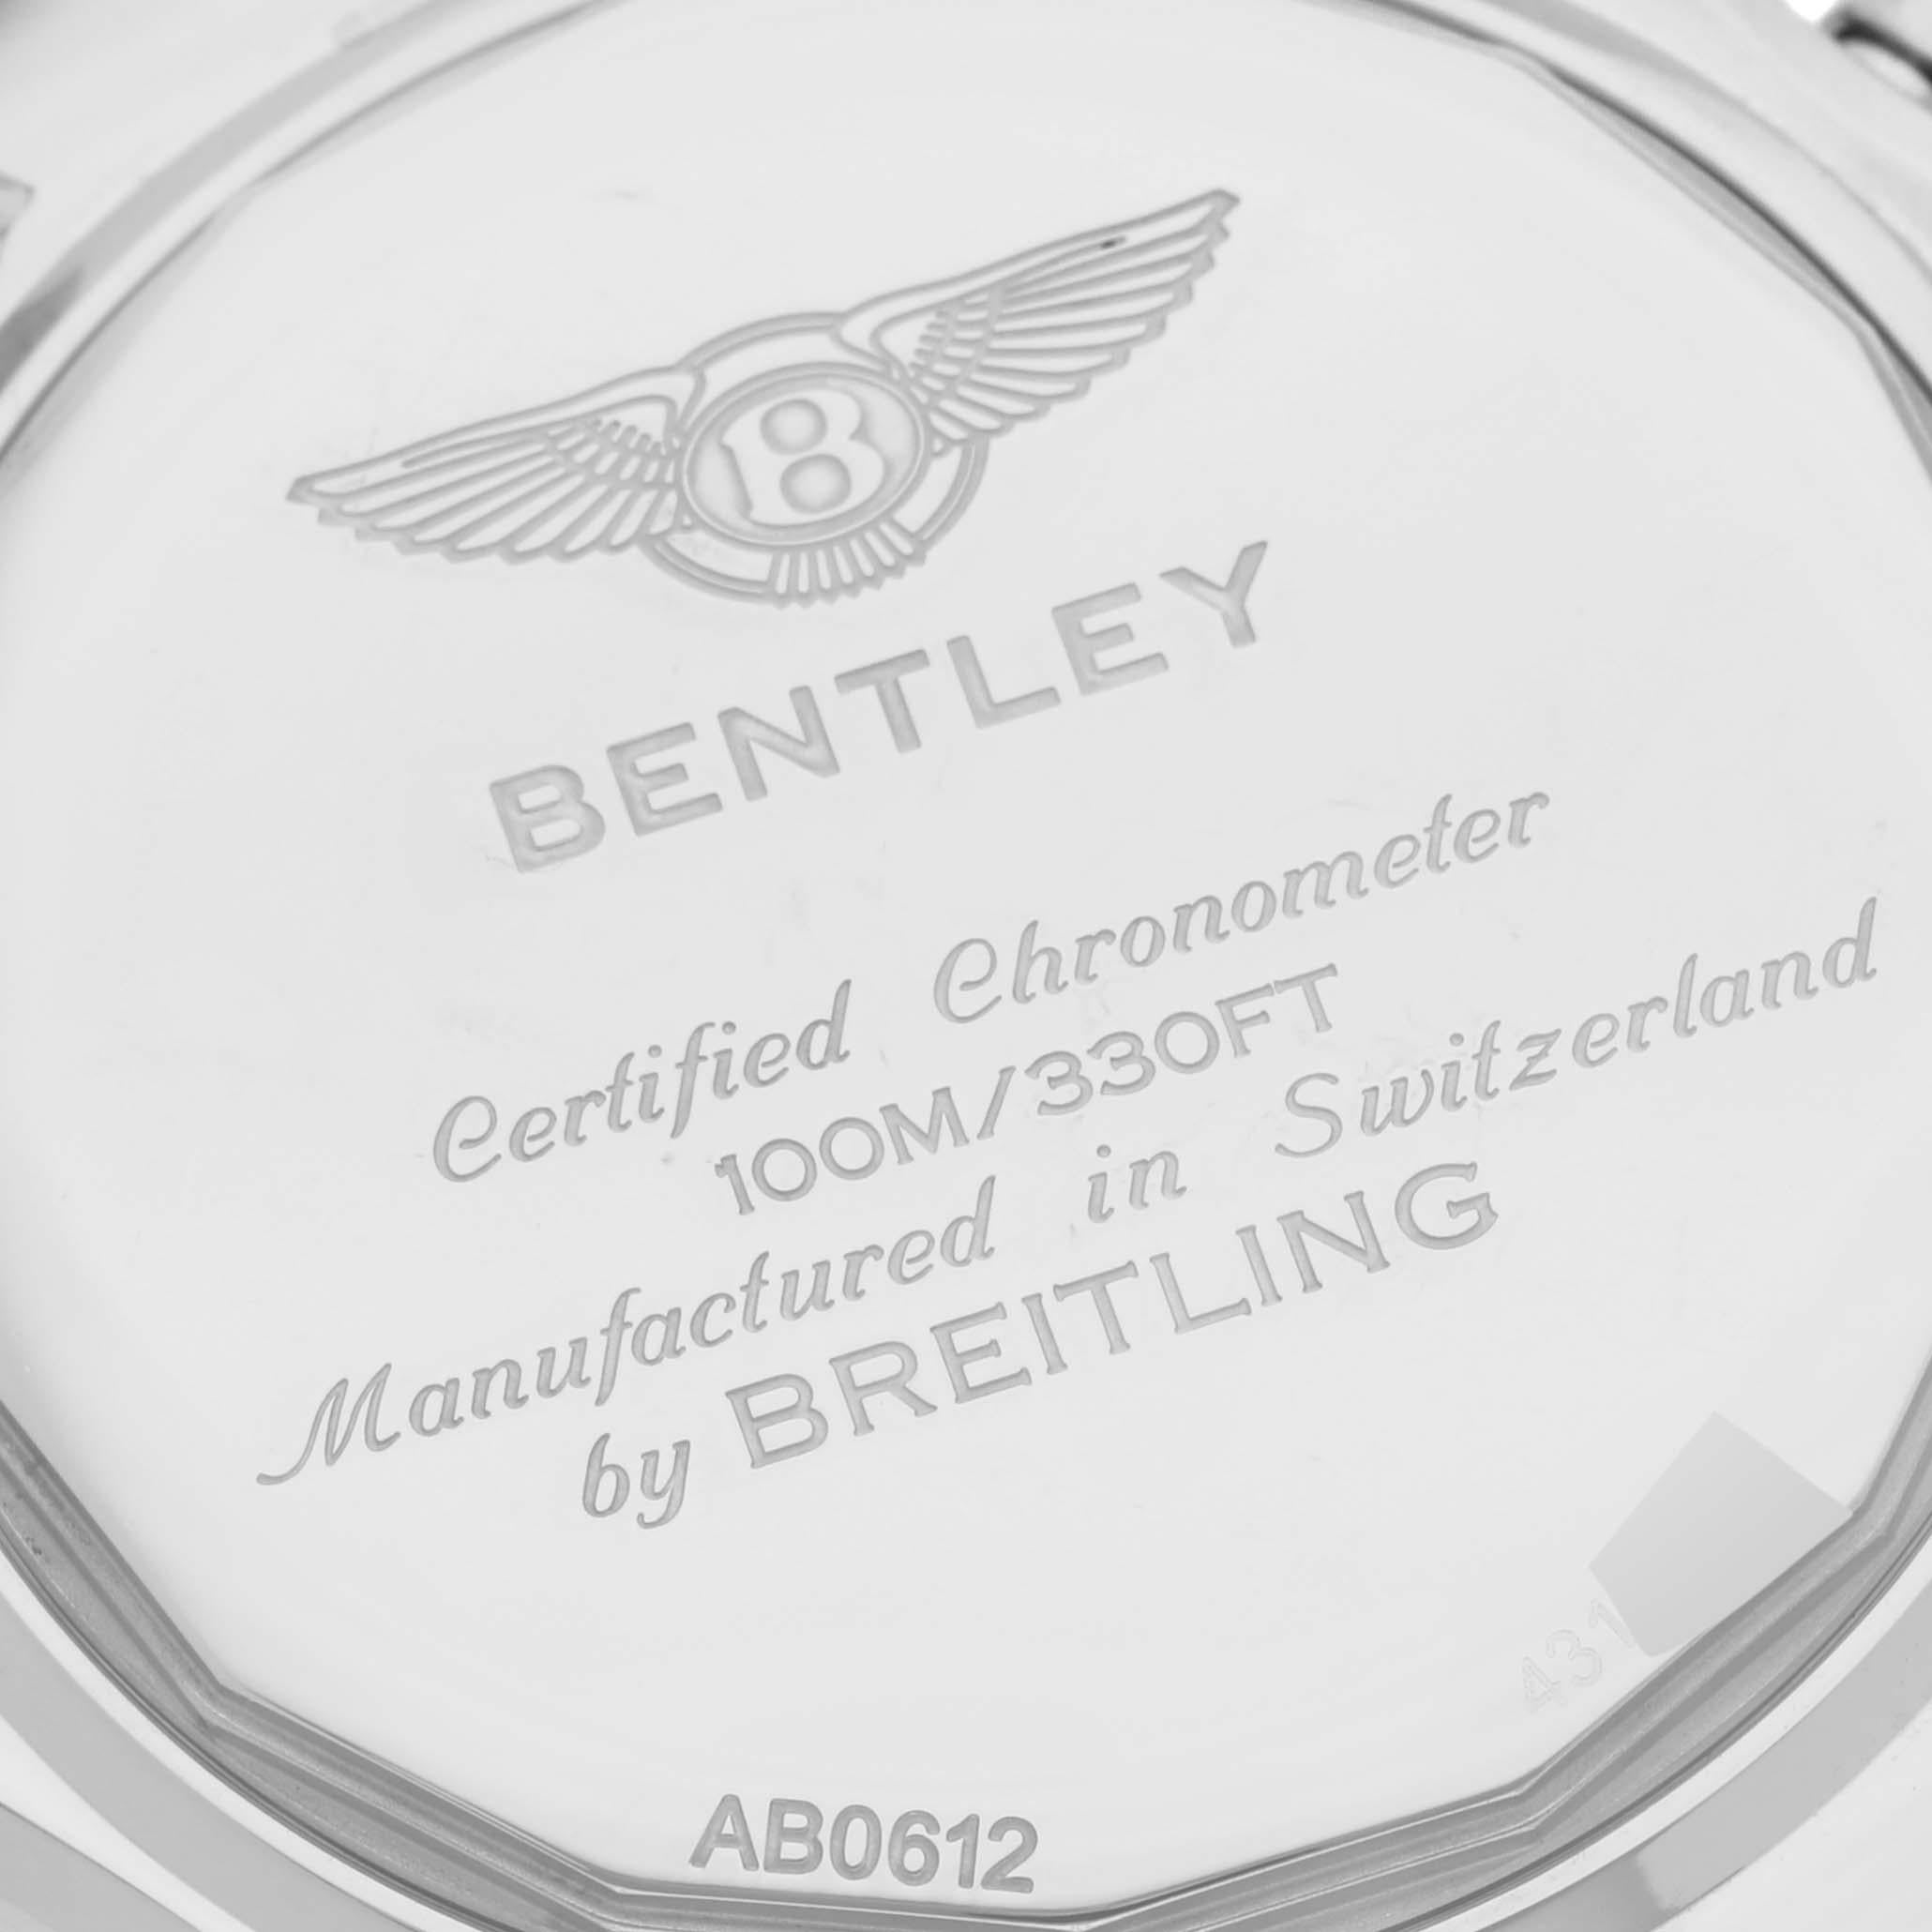 Breitling Bentley B06 Chronograph Steel Mens Watch AB0612 Box Card In Excellent Condition For Sale In Atlanta, GA